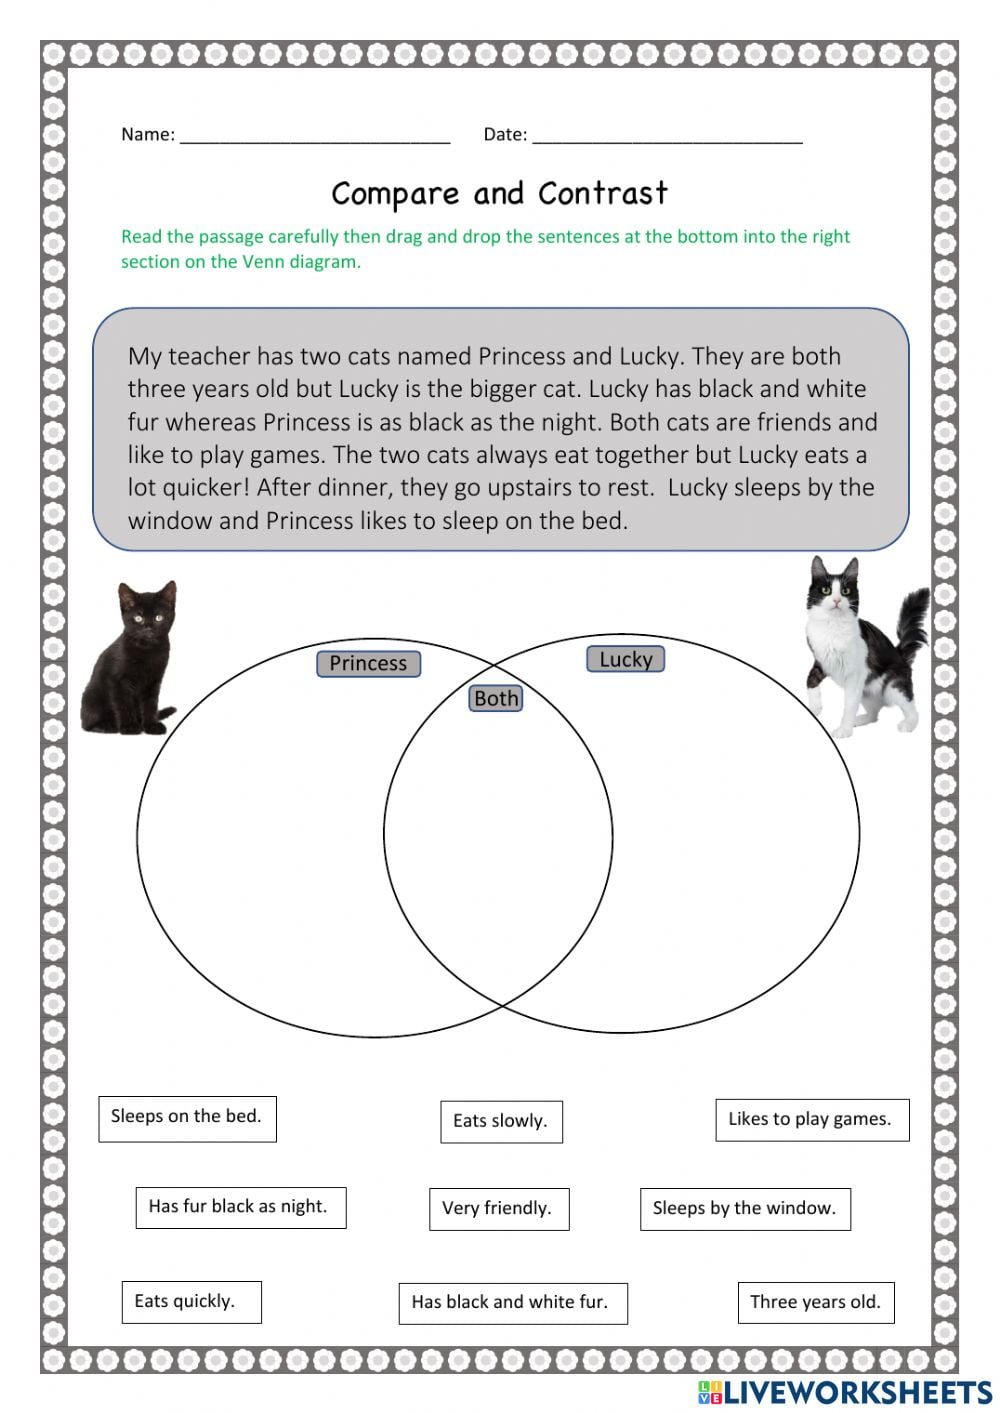 Compare And Contrast Interactive Worksheet For